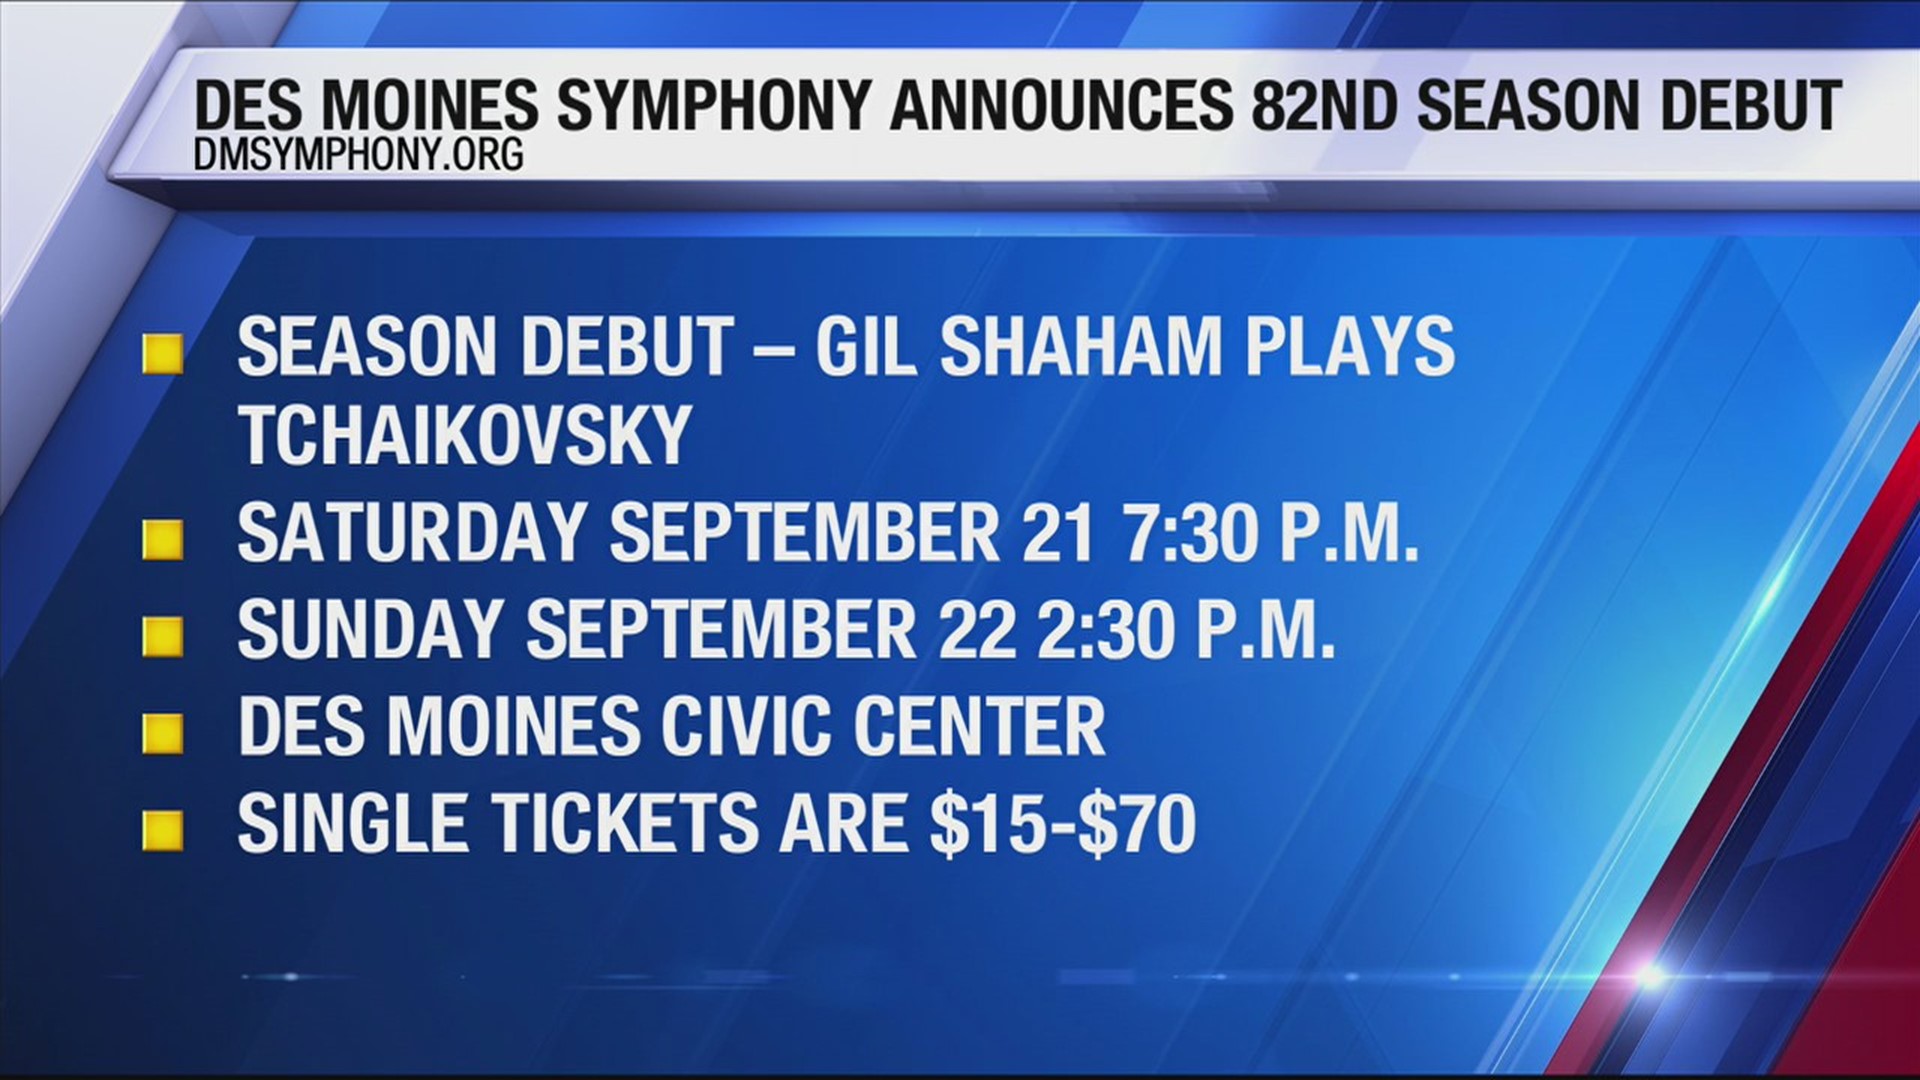 This weekend scenes from Shakespearean and Russian literature are the inspiration as the Des Moines Symphony kicks off their 82nd season with Grammy award-winner and America’s “Instrumentalist of the Year” Gil Shaham.